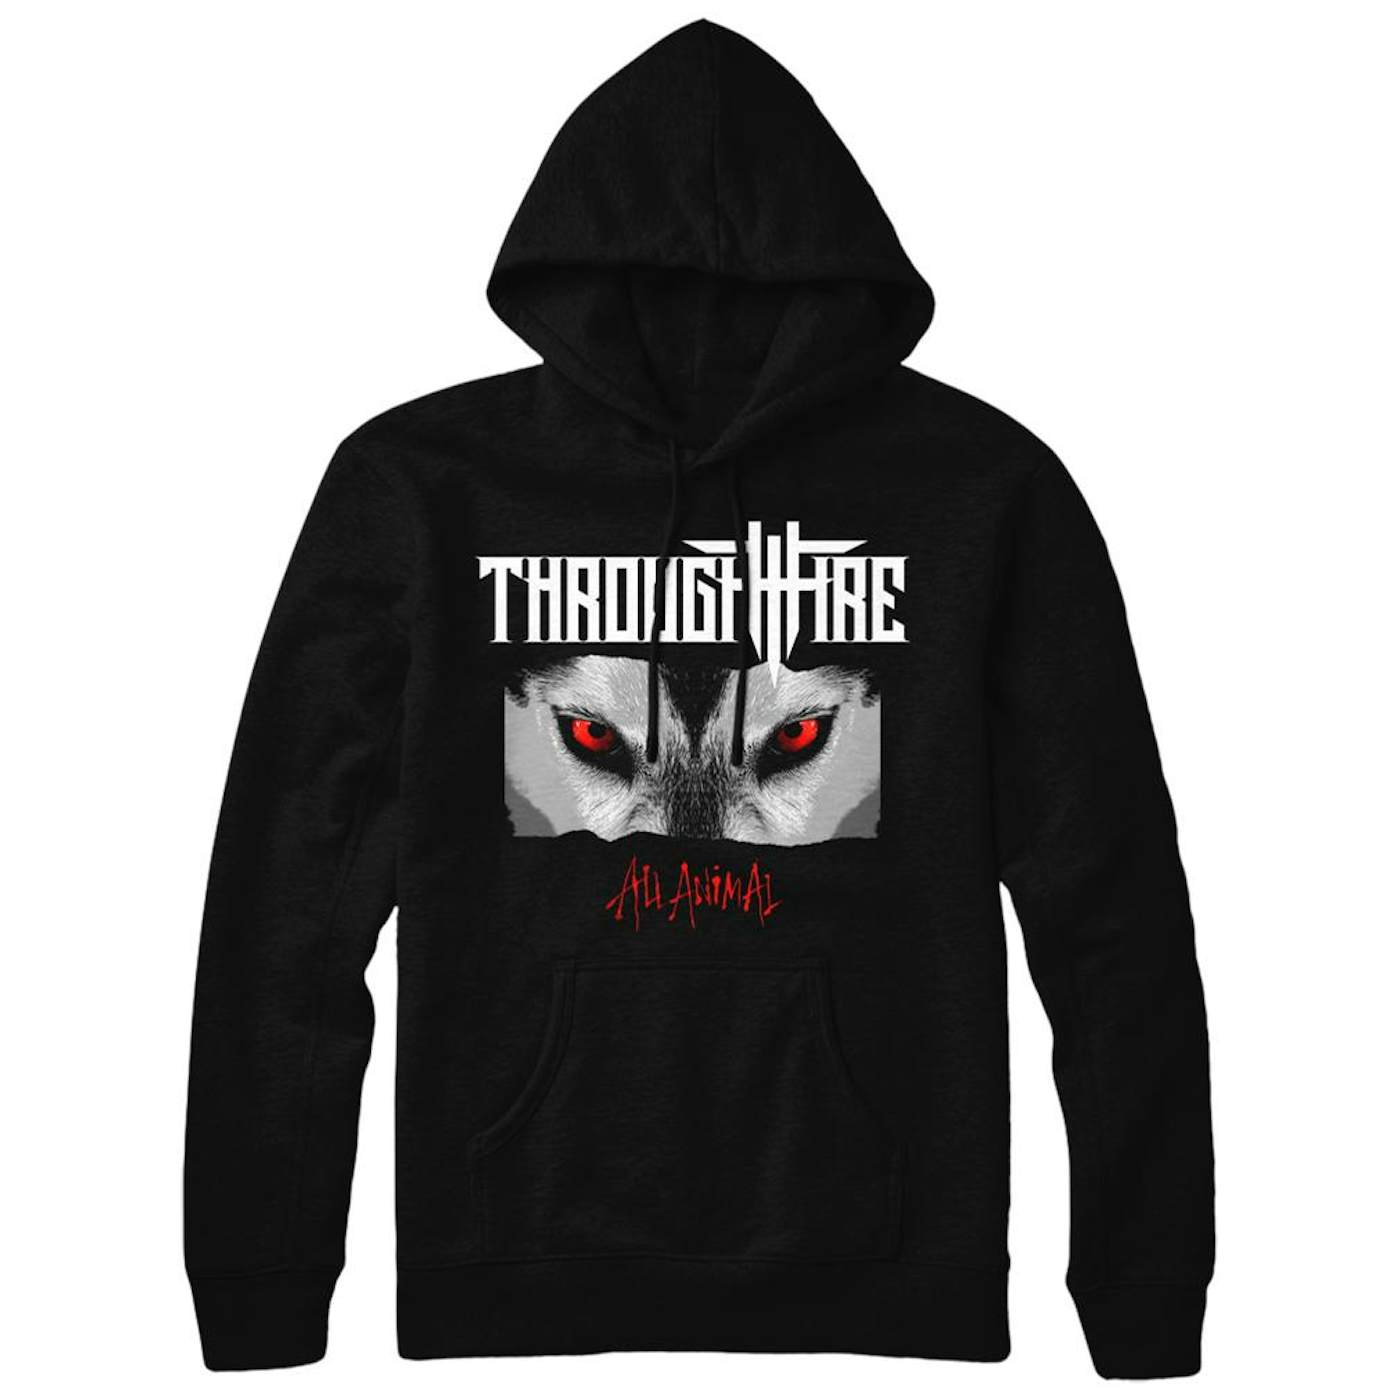 Through Fire - All Animal Hoodie